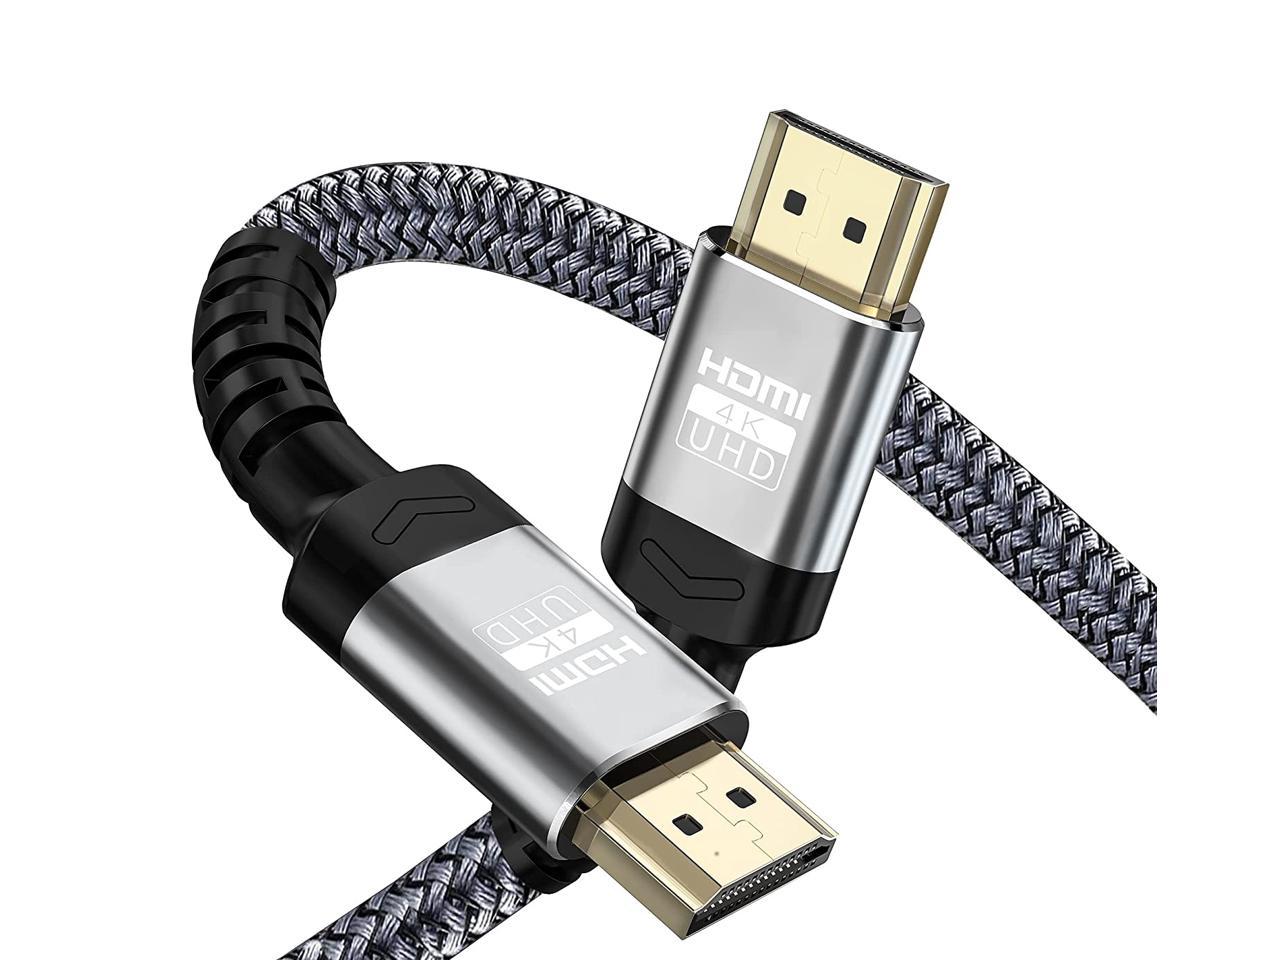 Details about   MacKuna UltraHD HDMI Cable v1.4 2.0 0.5M-20M High Speed 4K 3D 2160p Cablesson 